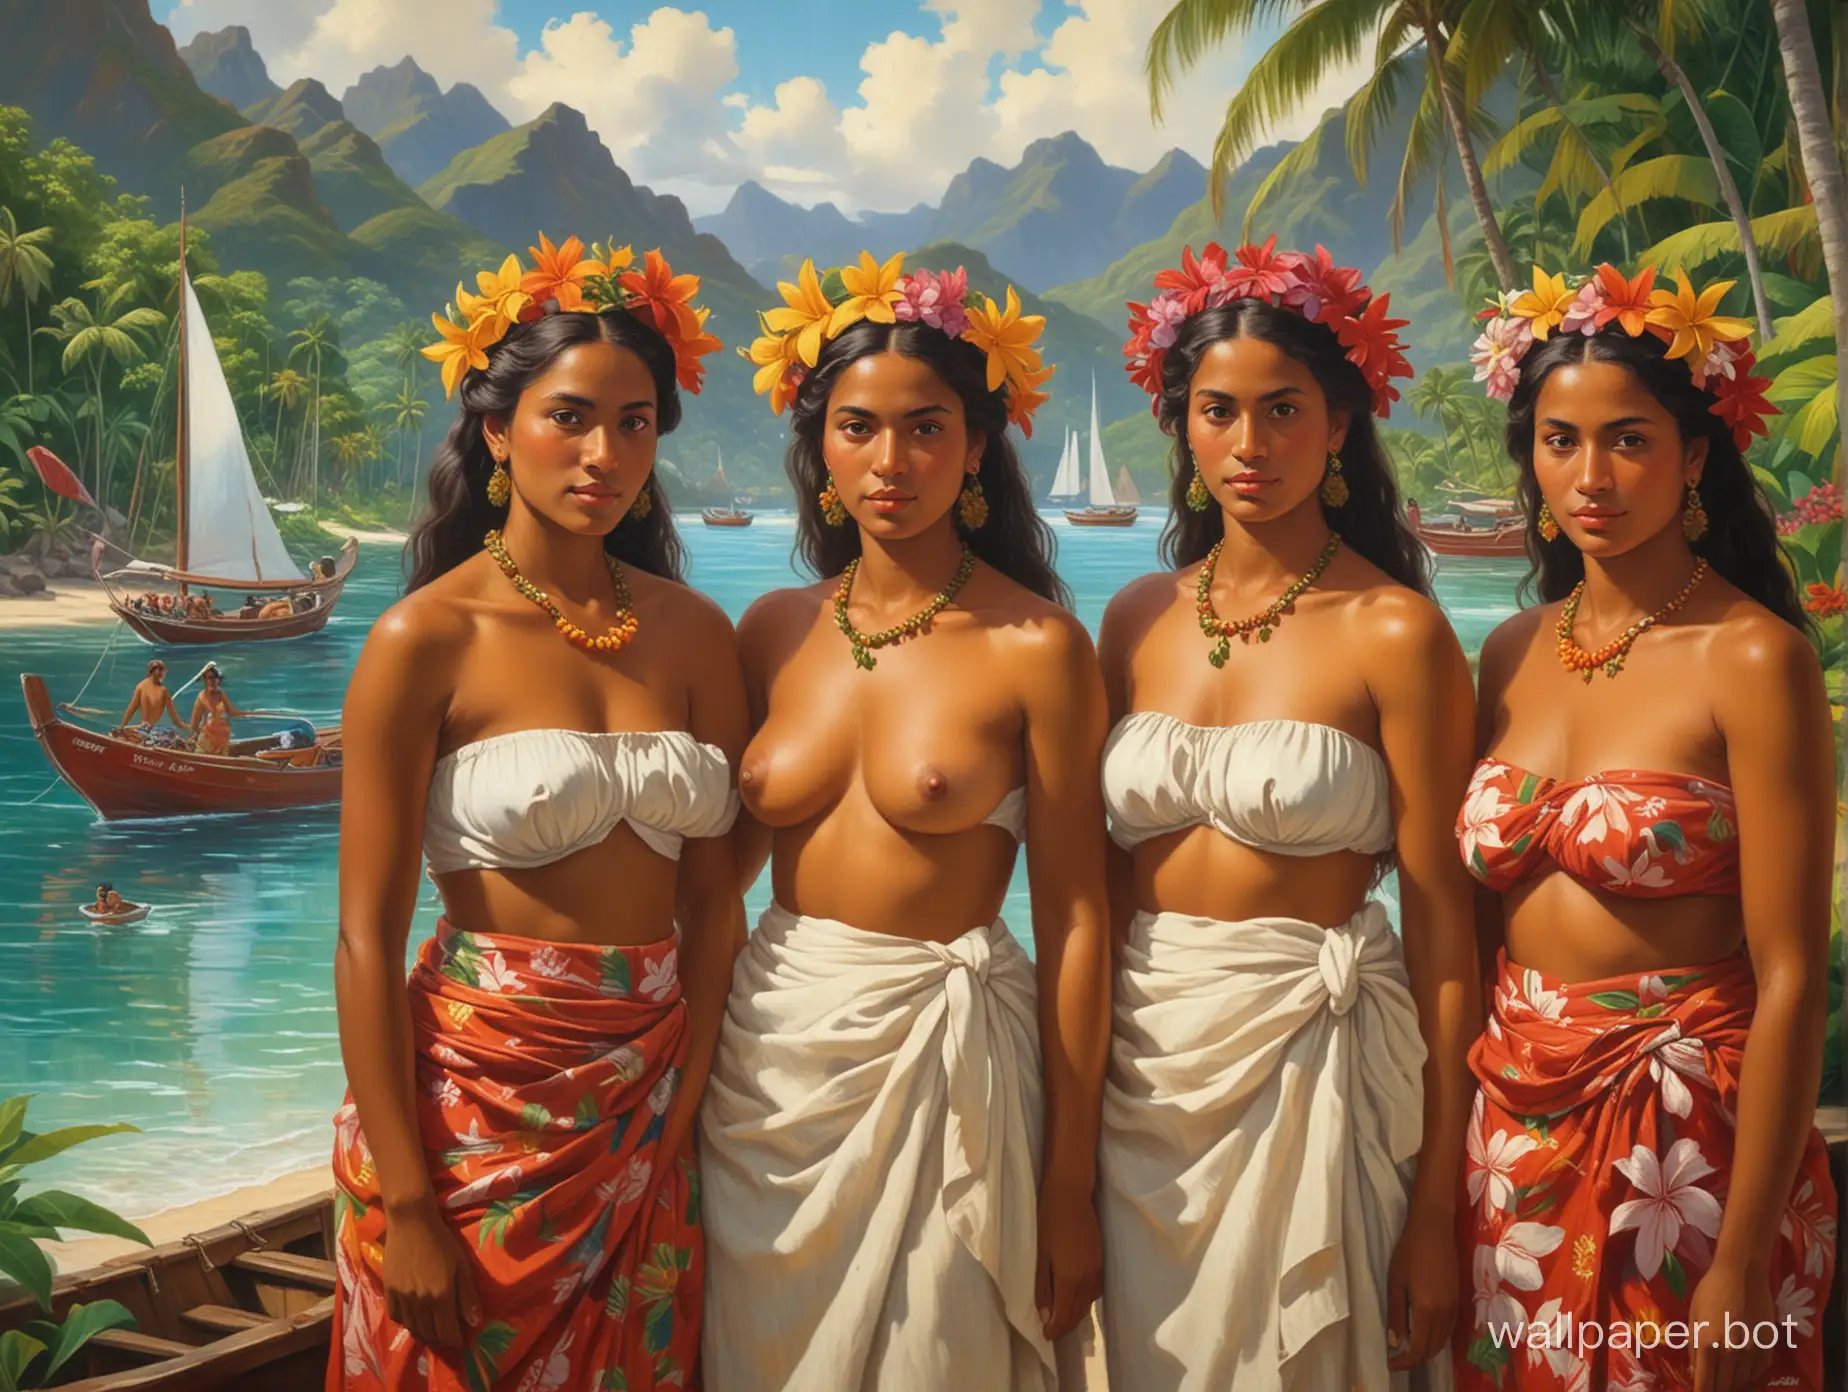 A stunning painting, reminiscent of Paul Gauguin's distinctive style, showcases three captivating Tahitian women in their traditional attire. Their beauty is accentuated by the vibrant flowers adorning their hair and bodies. The women seem uninhibited, basking in their natural state amidst a bustling 1895 Papeete. The background captures the daily lives of the local inhabitants, boats in the harbor, and the lush tropical landscape. The overall atmosphere of the painting is a harmonious blend of exotic and nostalgic, transporting viewers to the essence of Tahiti during Gauguin's time., painting